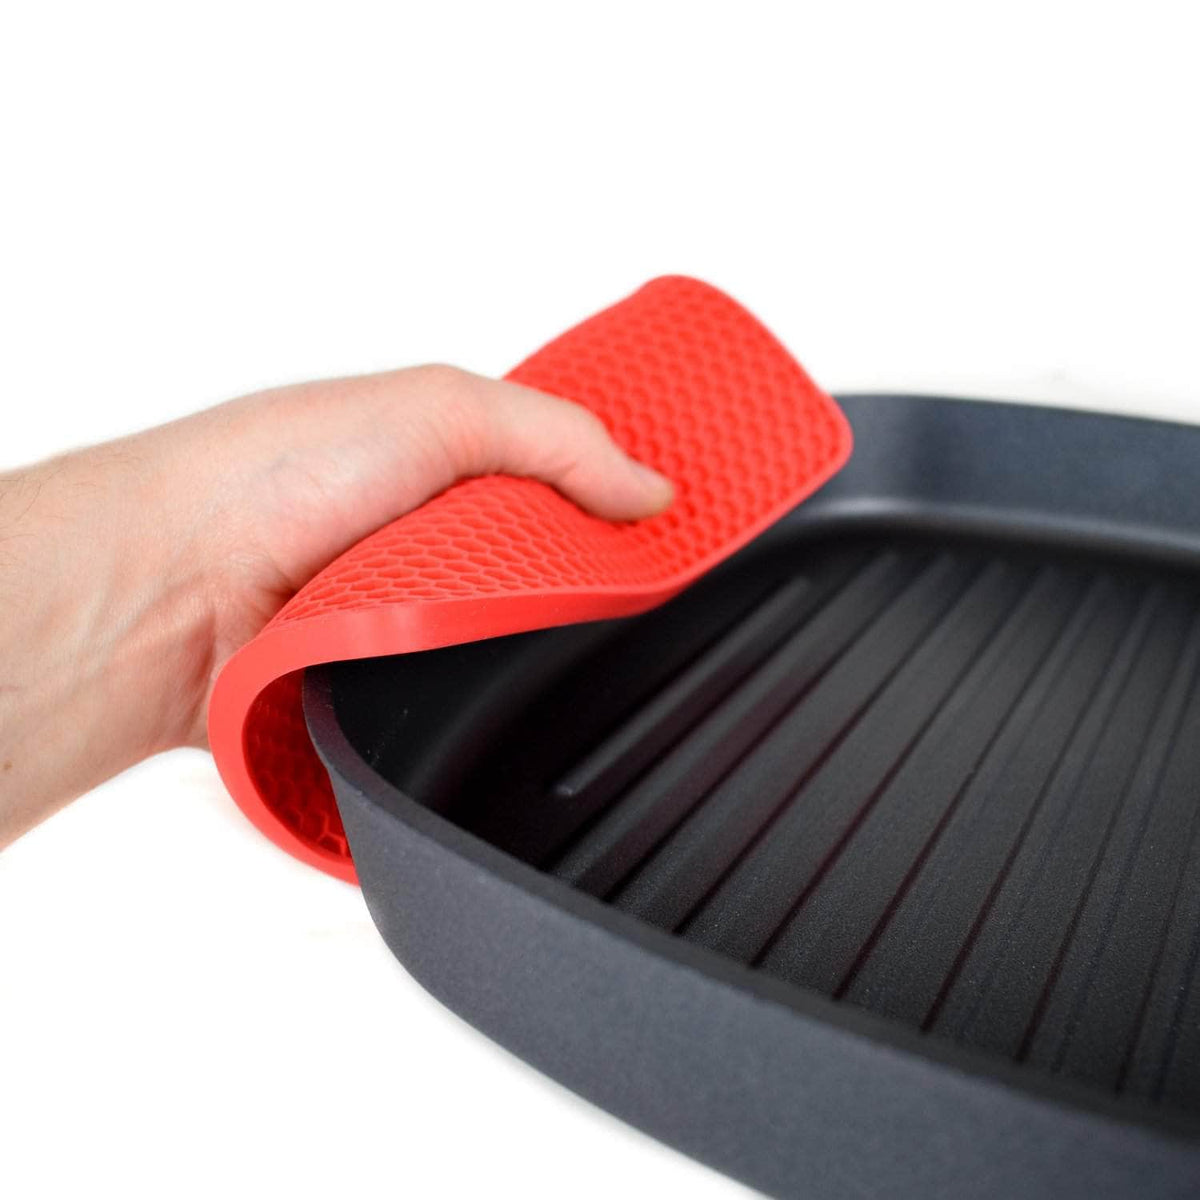 Woll™ silicone pot holder &amp; mat